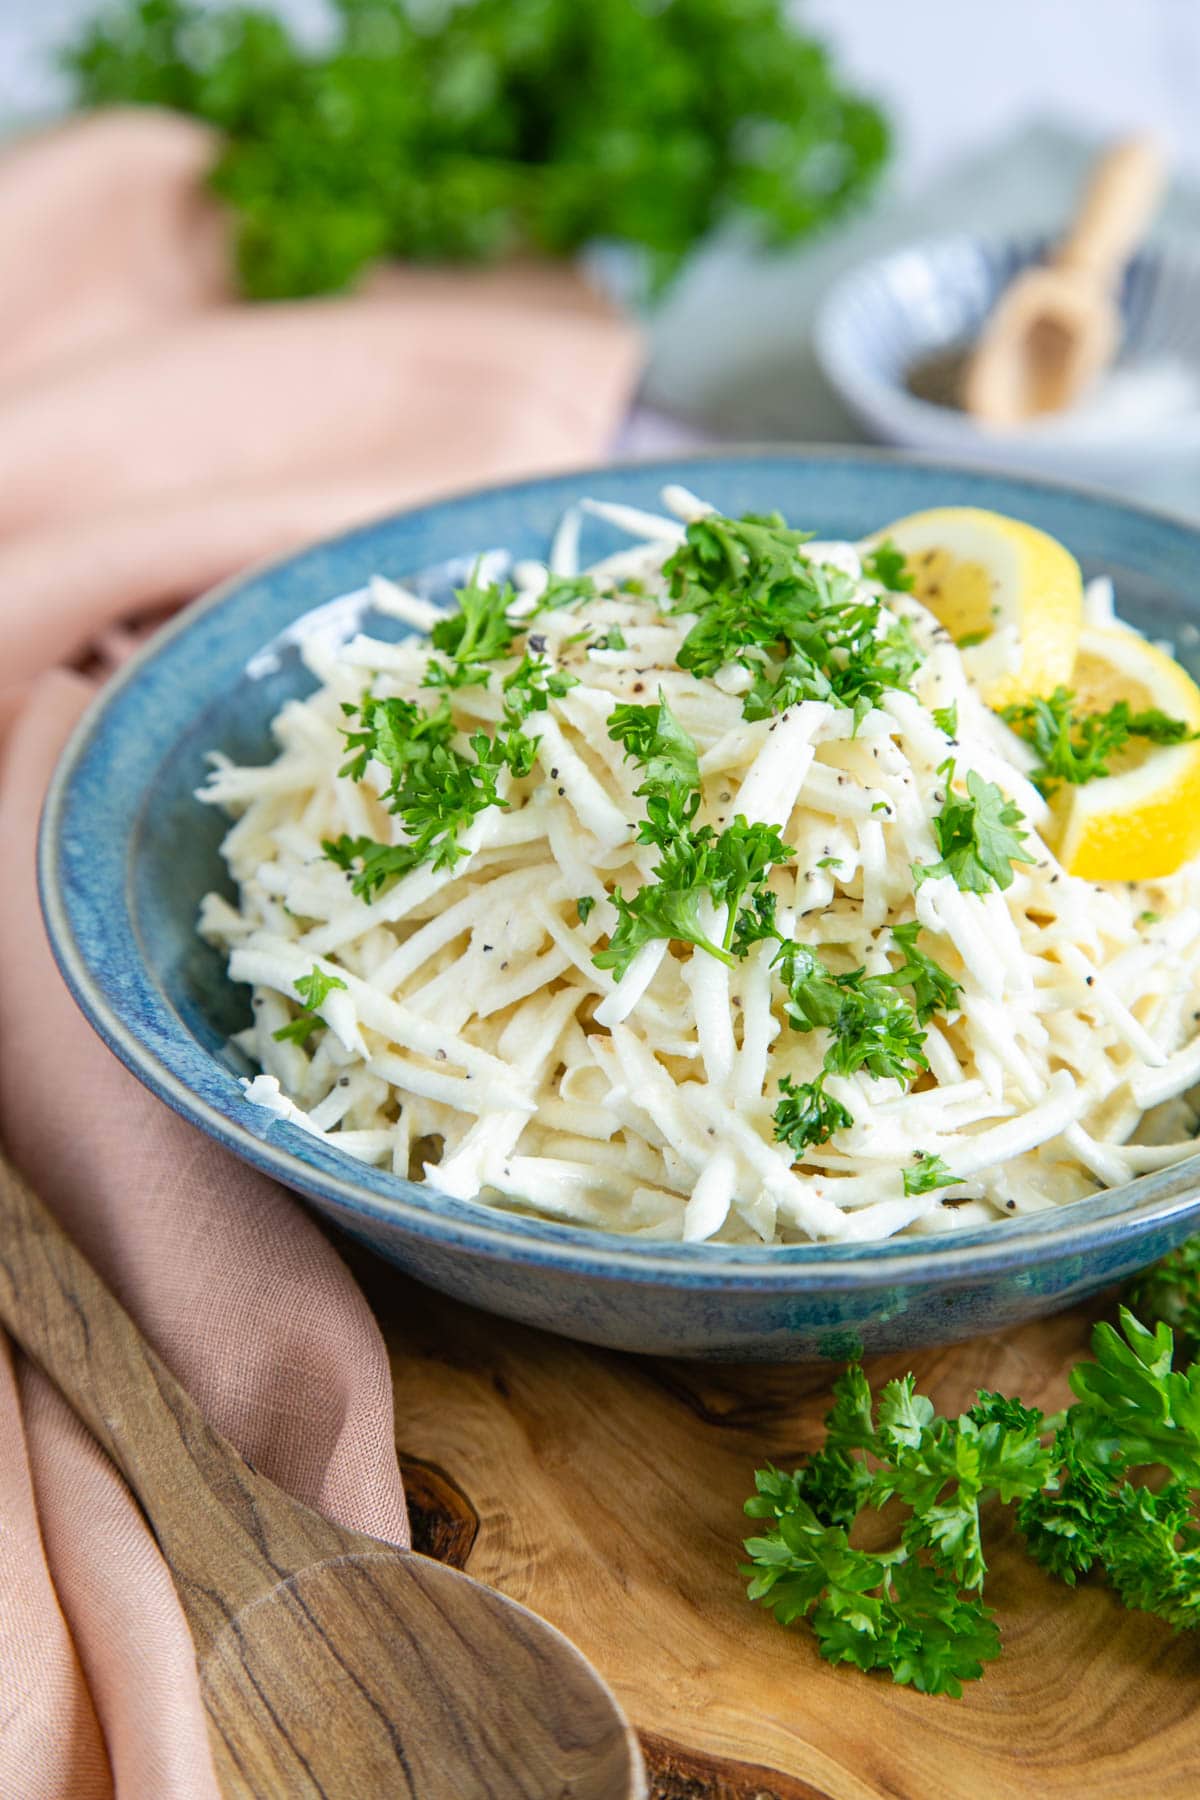 Creamy and delicious yet still fresh and light, this celeriac remoulade is the perfect winter salad.